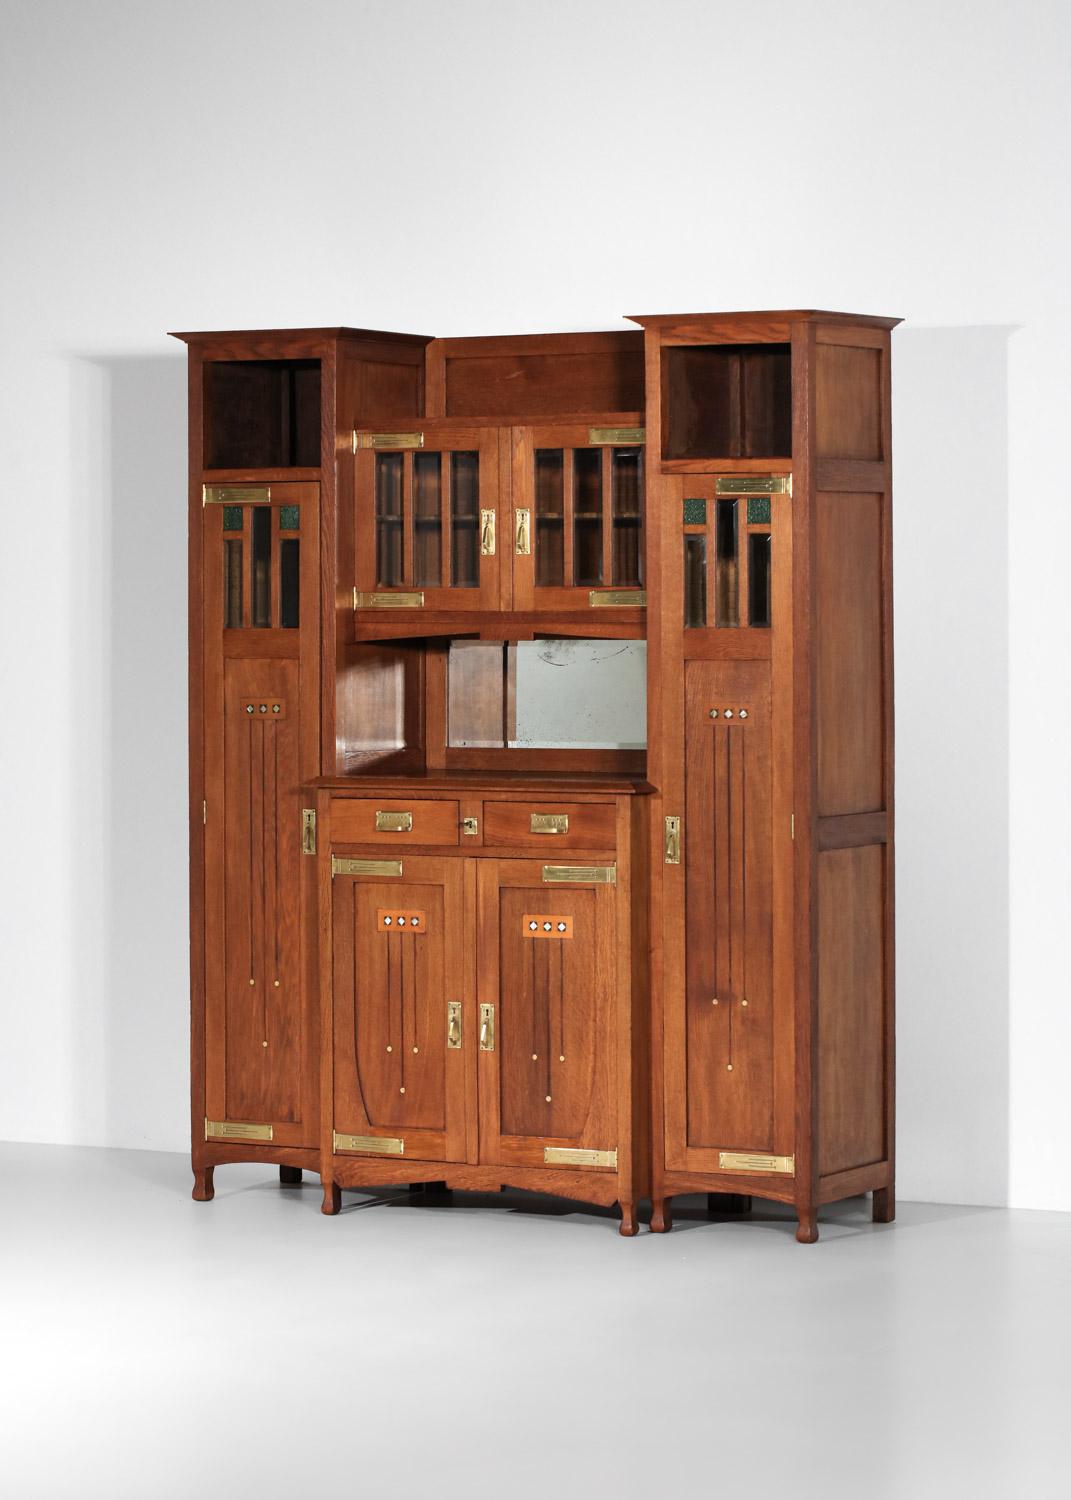 Imposing 1930s art nouveau buffet in the style of Gustave Serrurier Bovy. The sideboard is made up of four elements (which can be dismantled if required for shipping): the two large side columns, the lower sideboard and the upper glass shelf. The